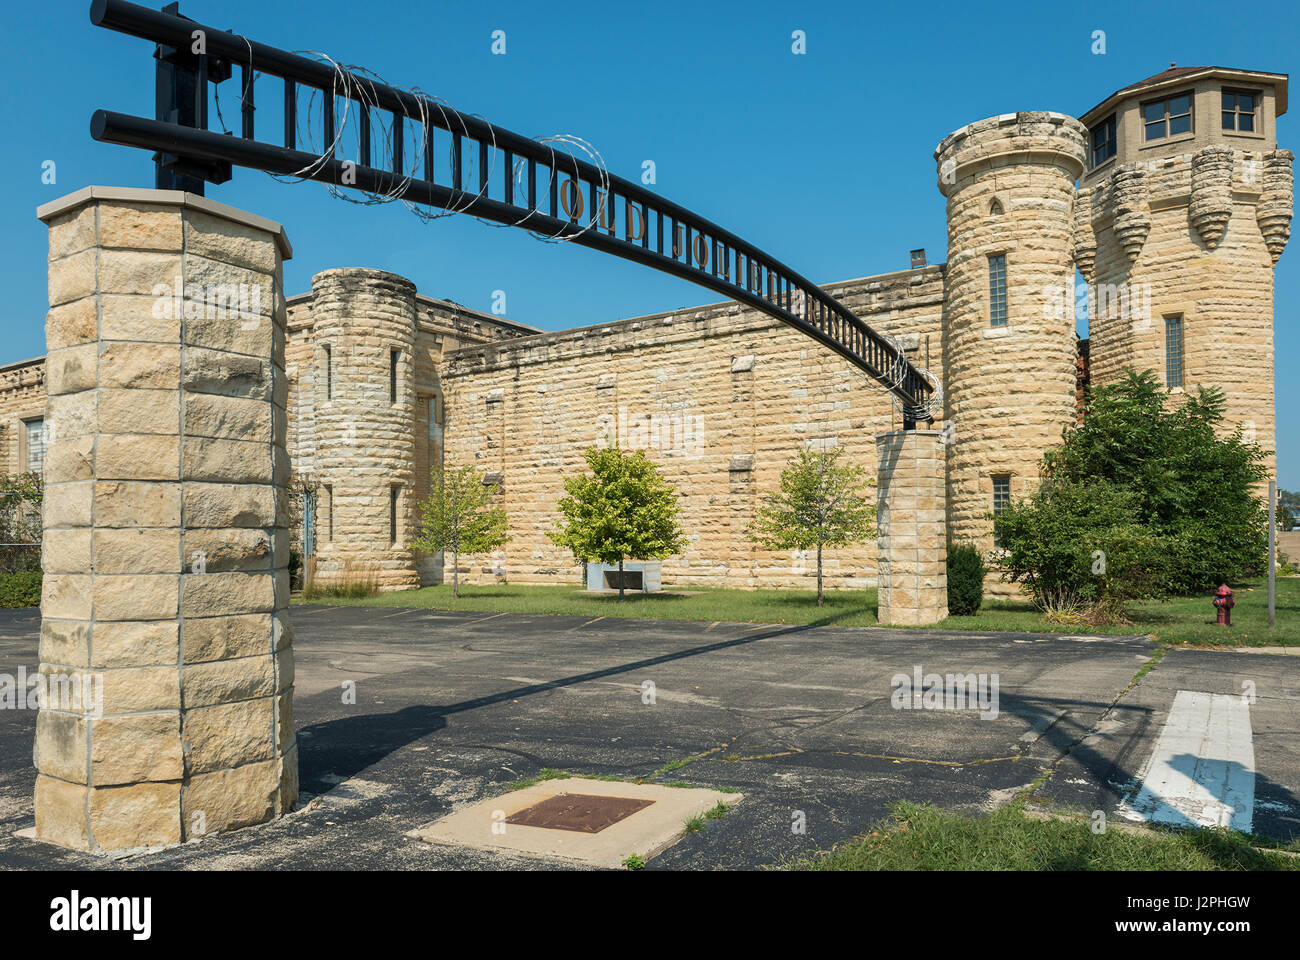 The Entry Gate To Joliet Penitentiary Located On Route 66 In Illinois. Stock Photo